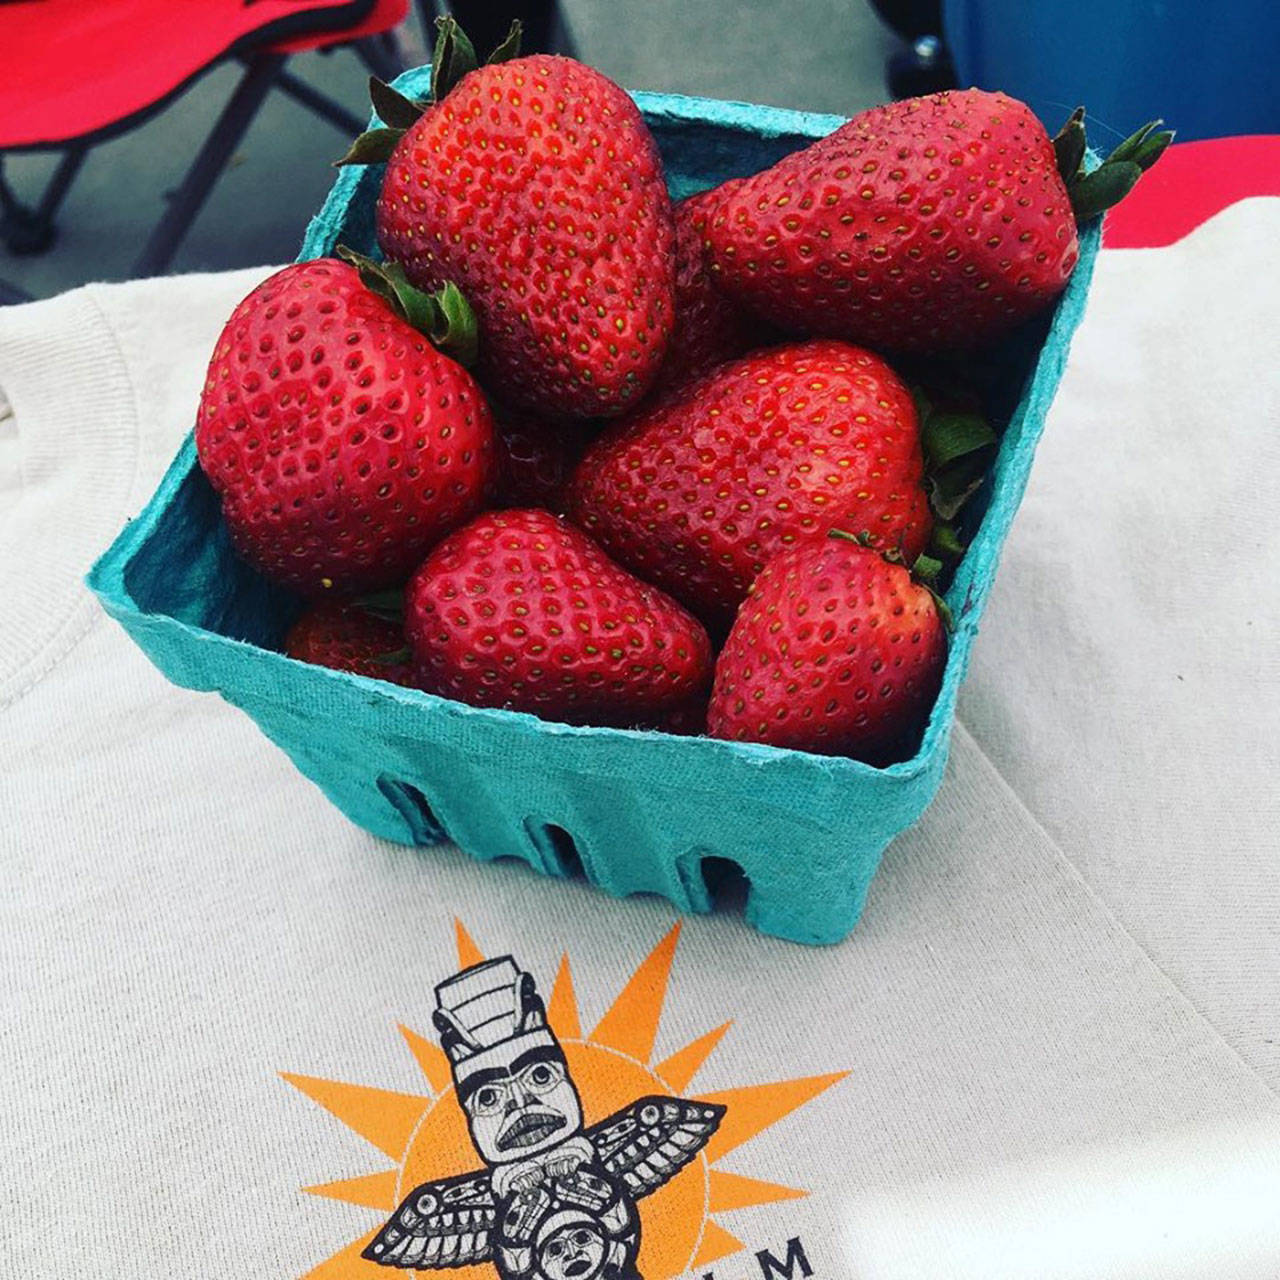 Check out local fruit such as these strawberries from Joy Farm, at the Sequim Farmers Market. Submitted photo